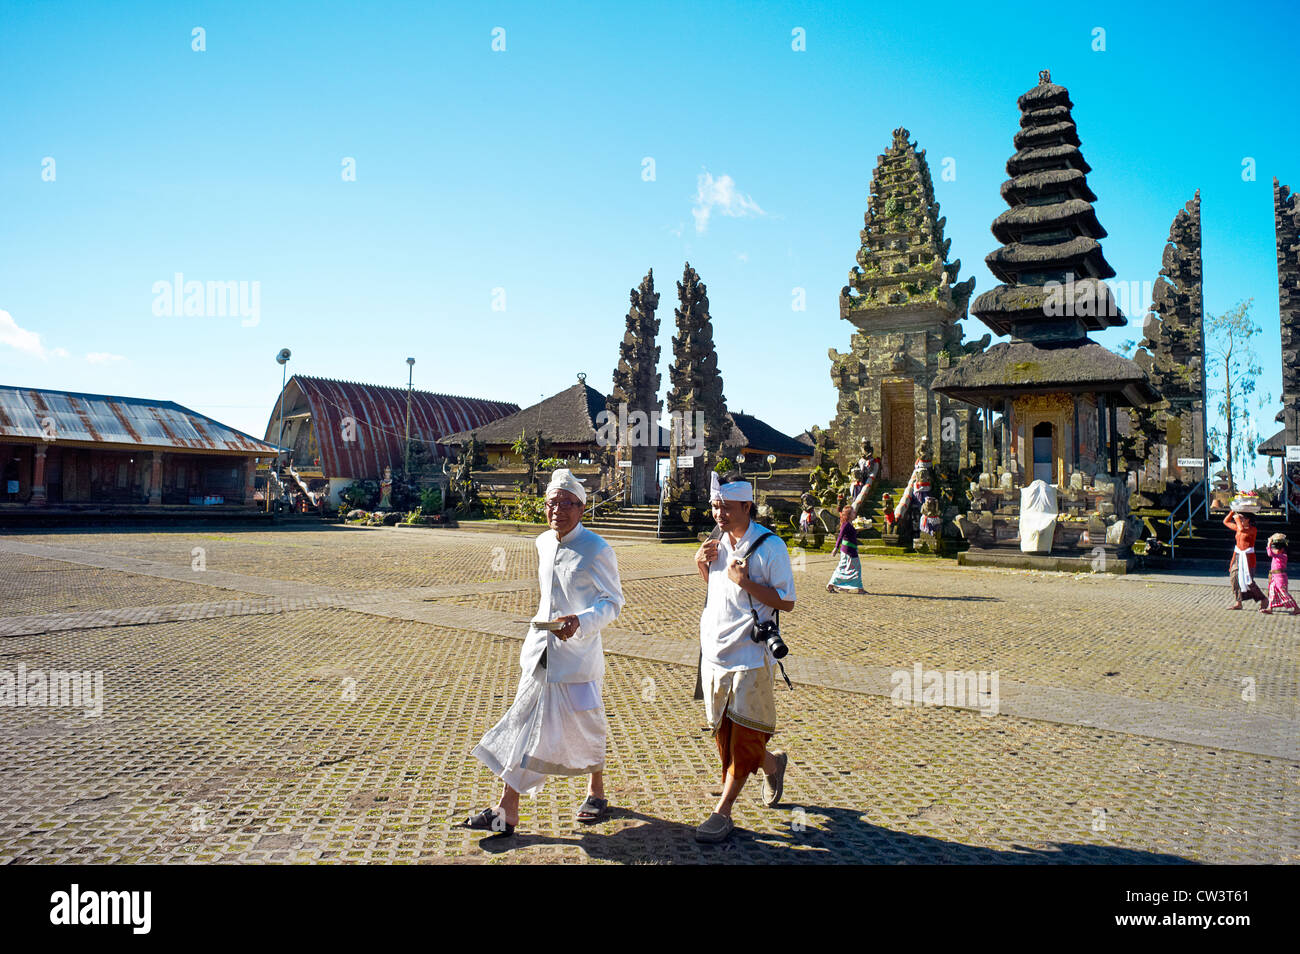 The Jero Gede of Mt Batur discusses his work on the temple grounds. Stock Photo